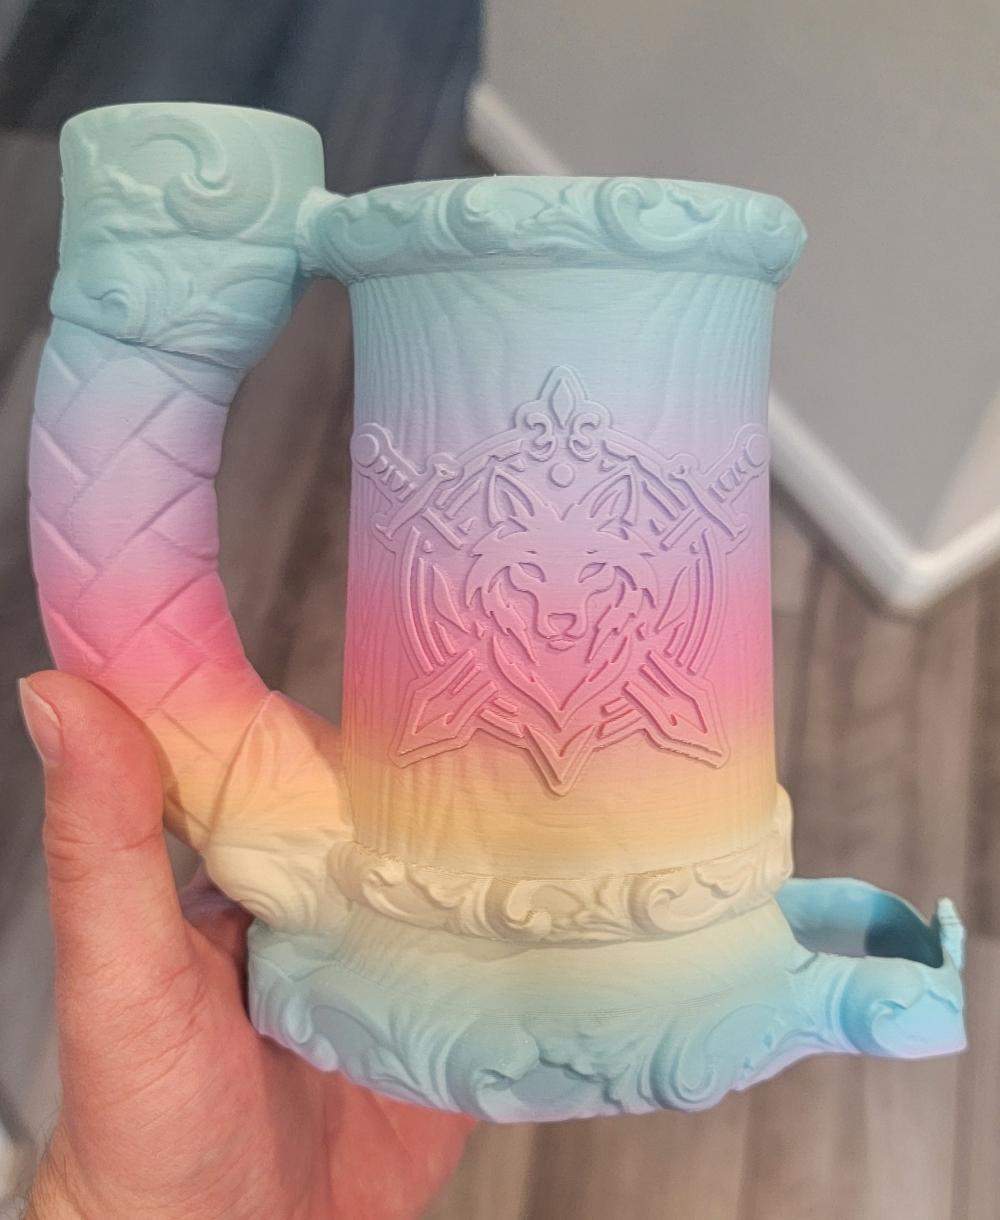 WOLF CREST CAN COZY DICE TOWER - Wife wanted one in pastel rainbow, it turned out great. I used auto tree supports on the plate only and got good results - 3d model